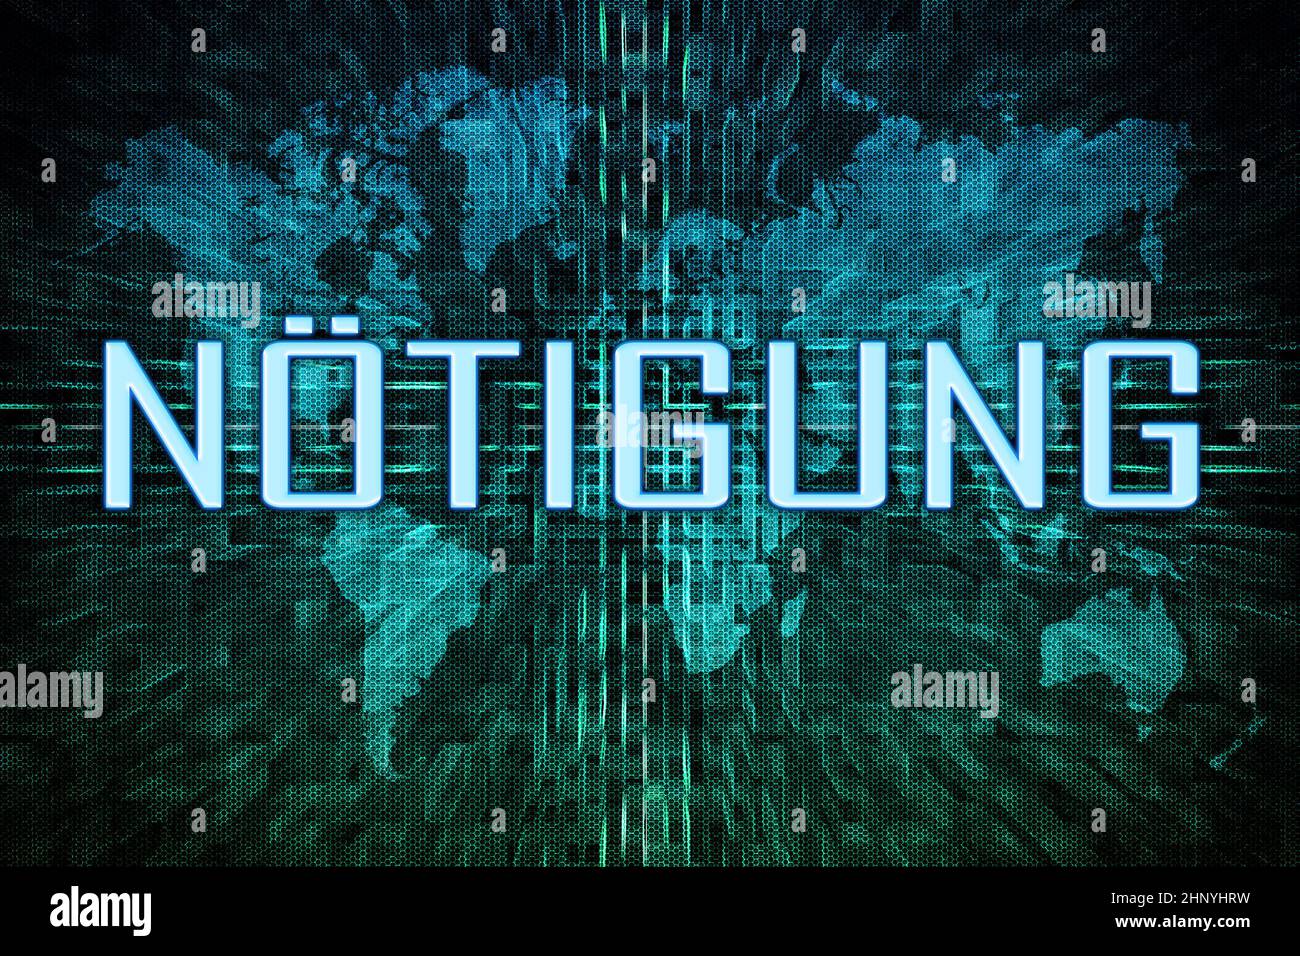 Noetigung - german word for coercion or duress - text concept on green digital world map background. Stock Photo